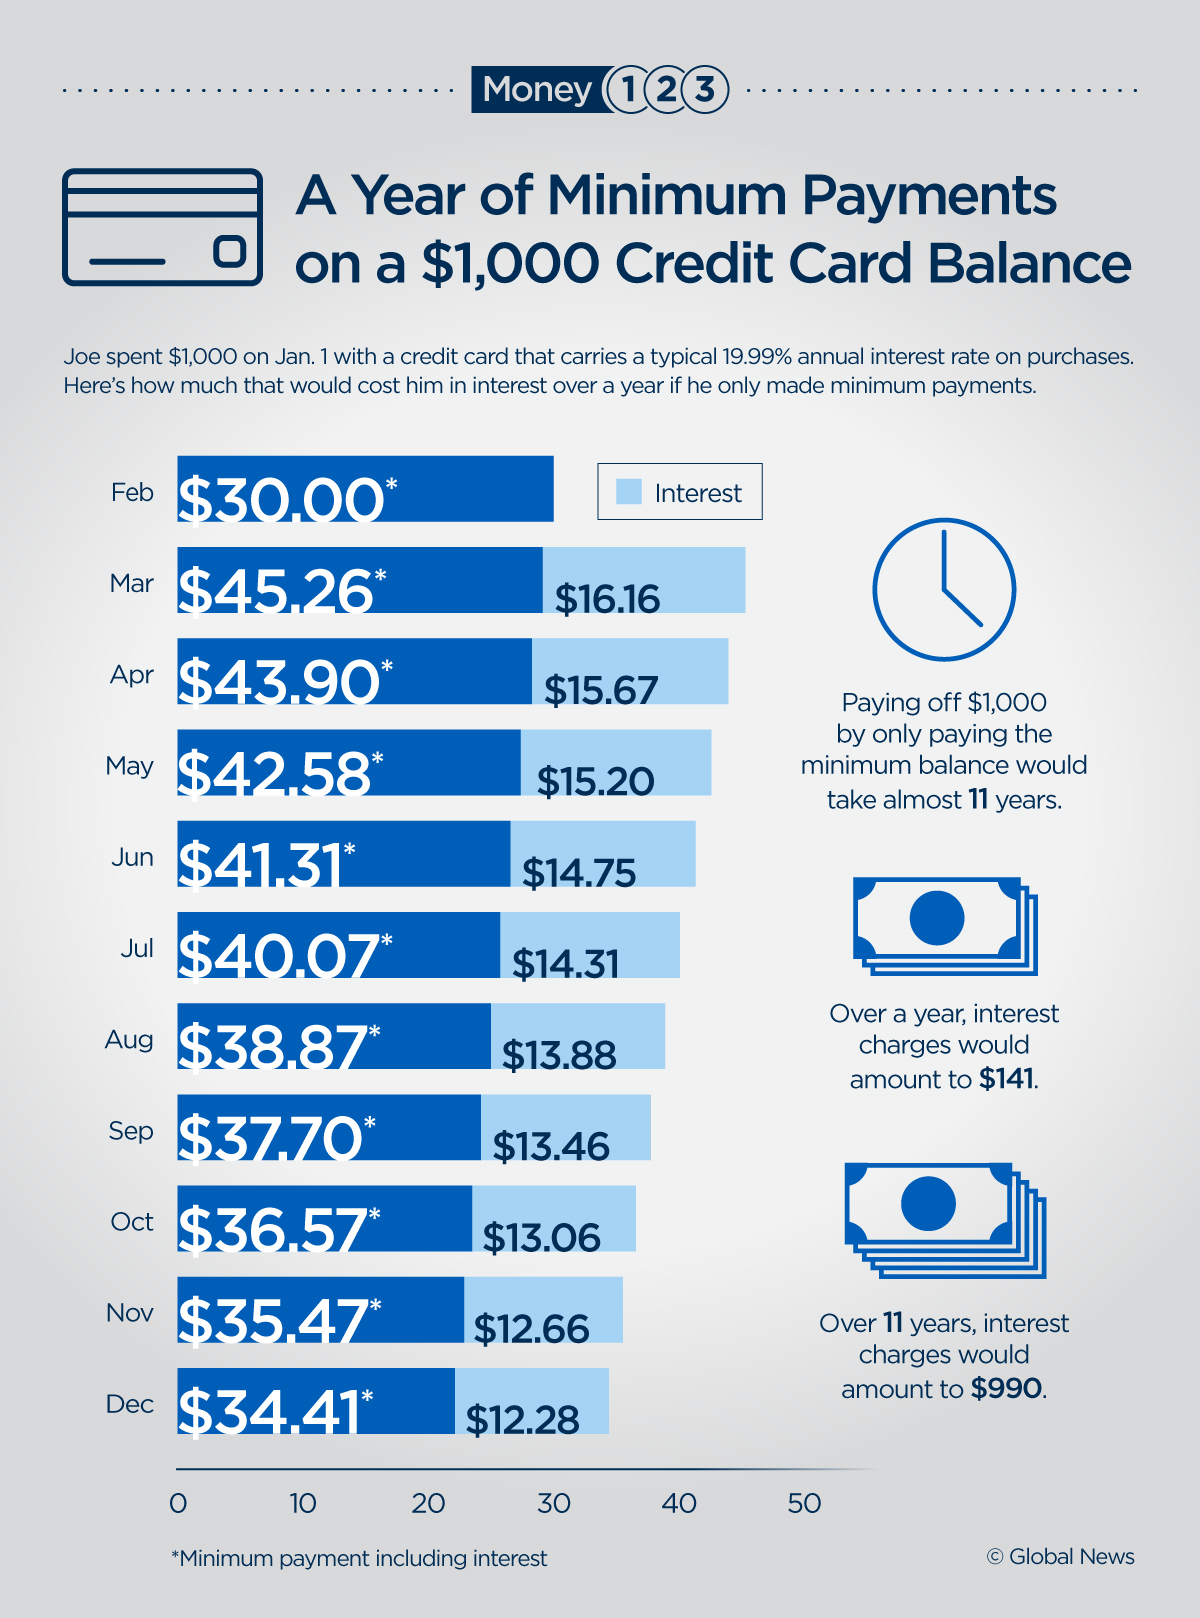 here-s-what-happens-to-1k-in-credit-card-debt-when-you-make-only